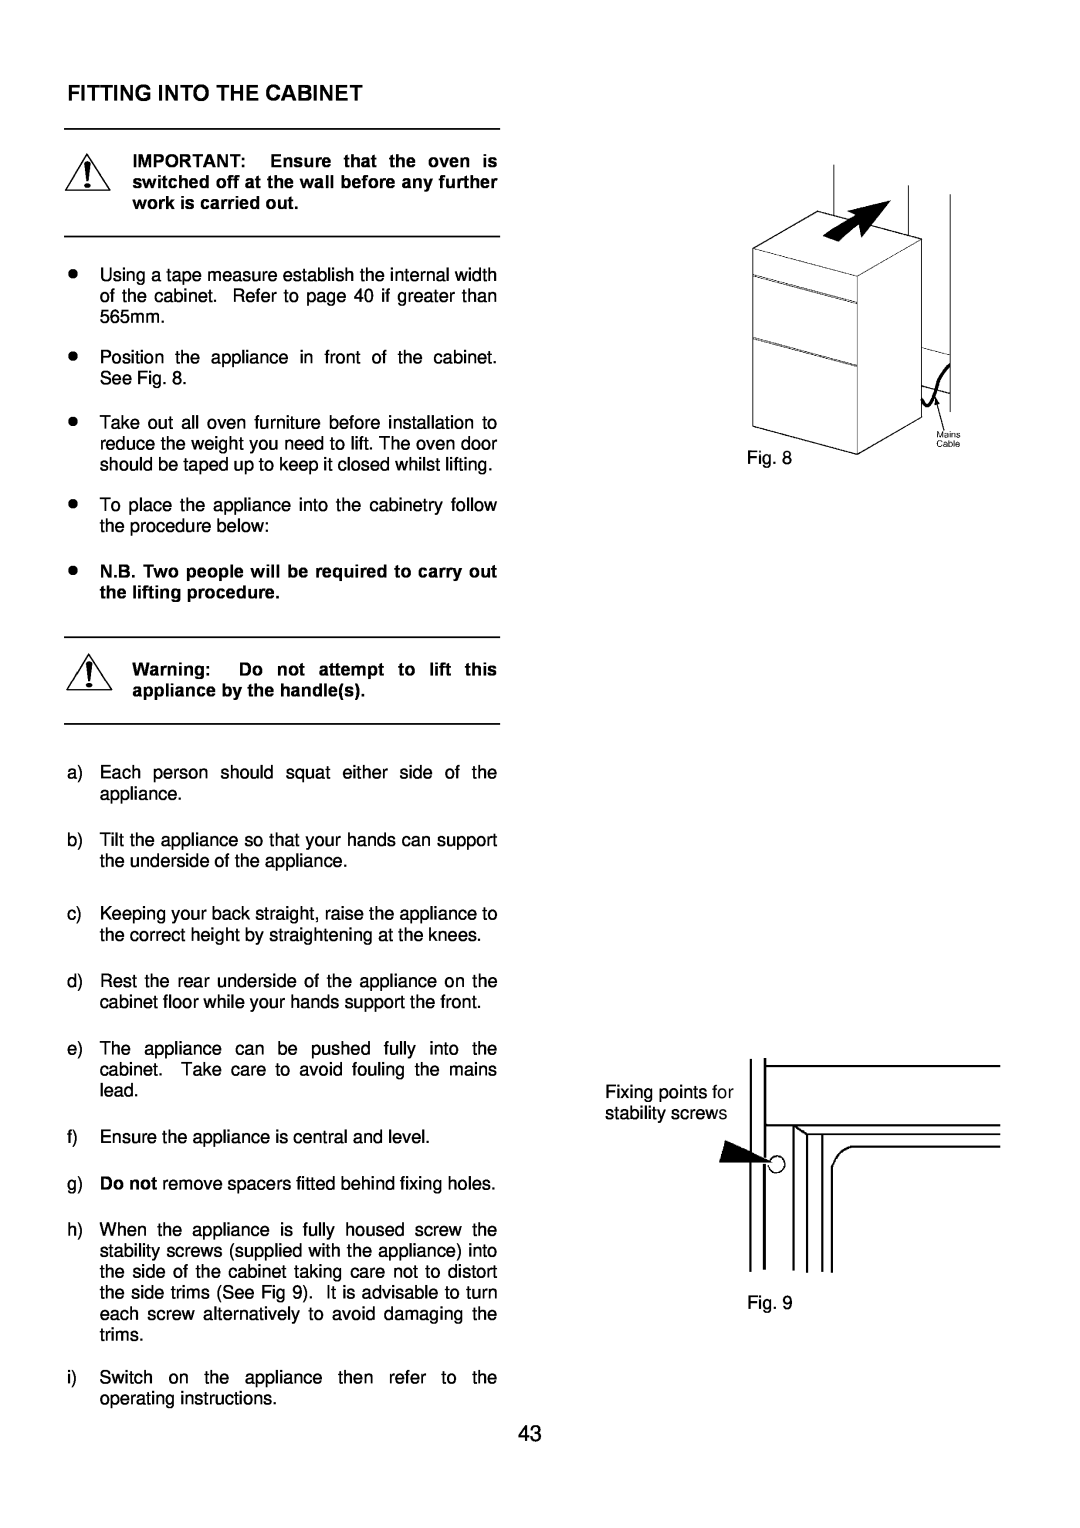 Electrolux D4101-5 manual Fitting Into The Cabinet, N.B. Two people will be required to carry out the lifting procedure 